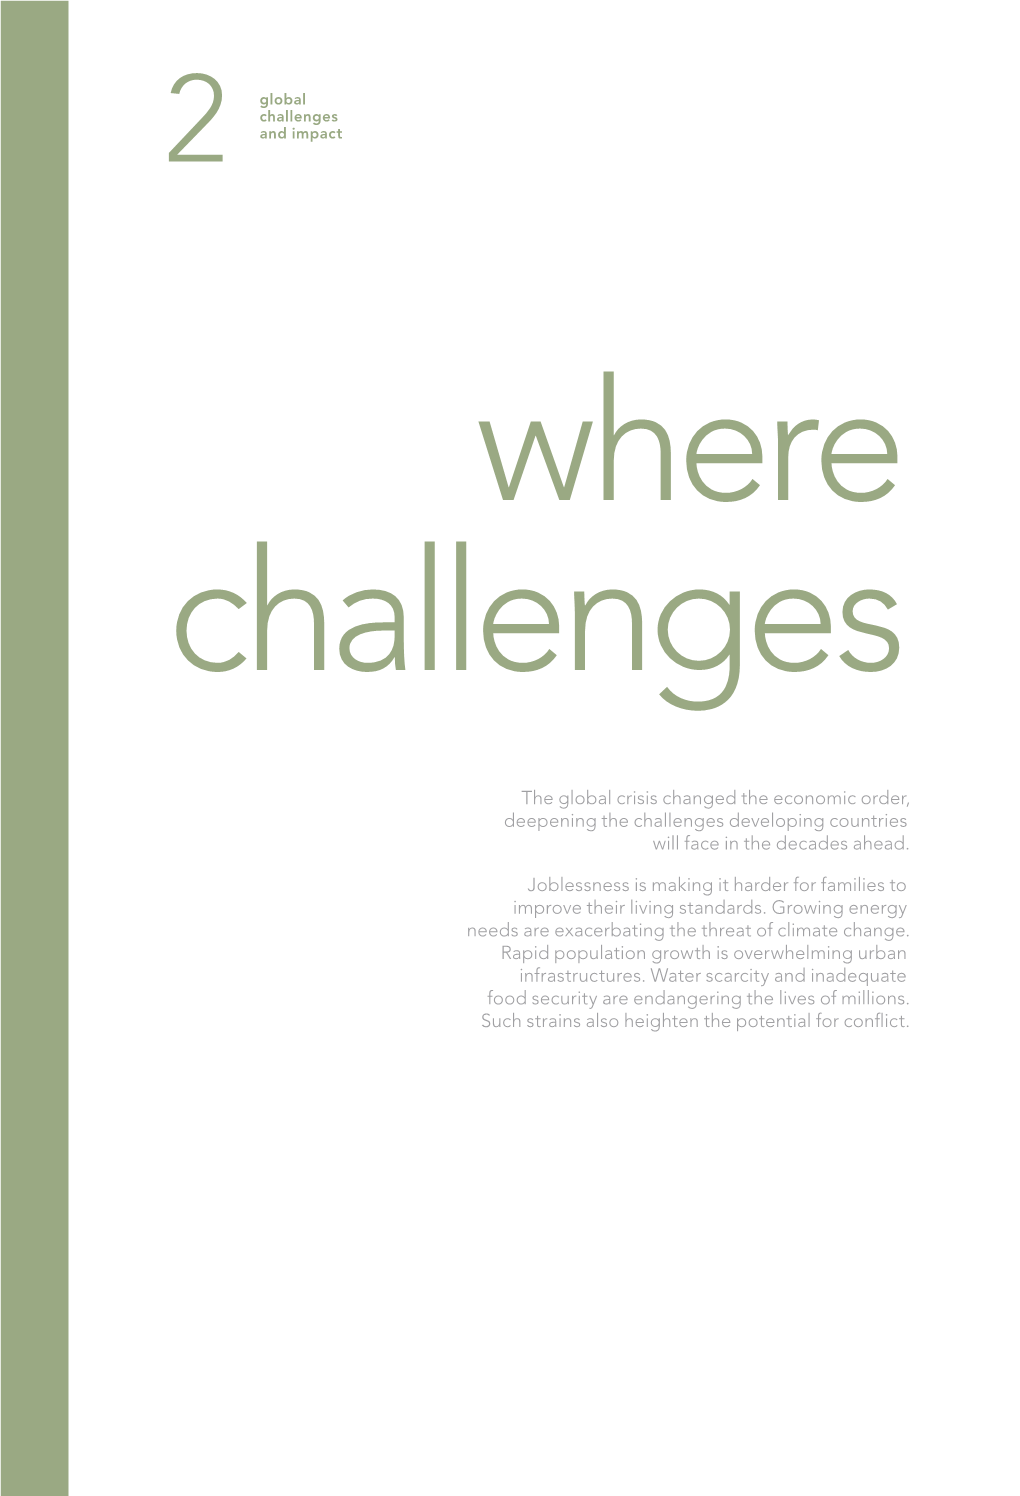 CHAPTER 2: Global Challenges and Impact